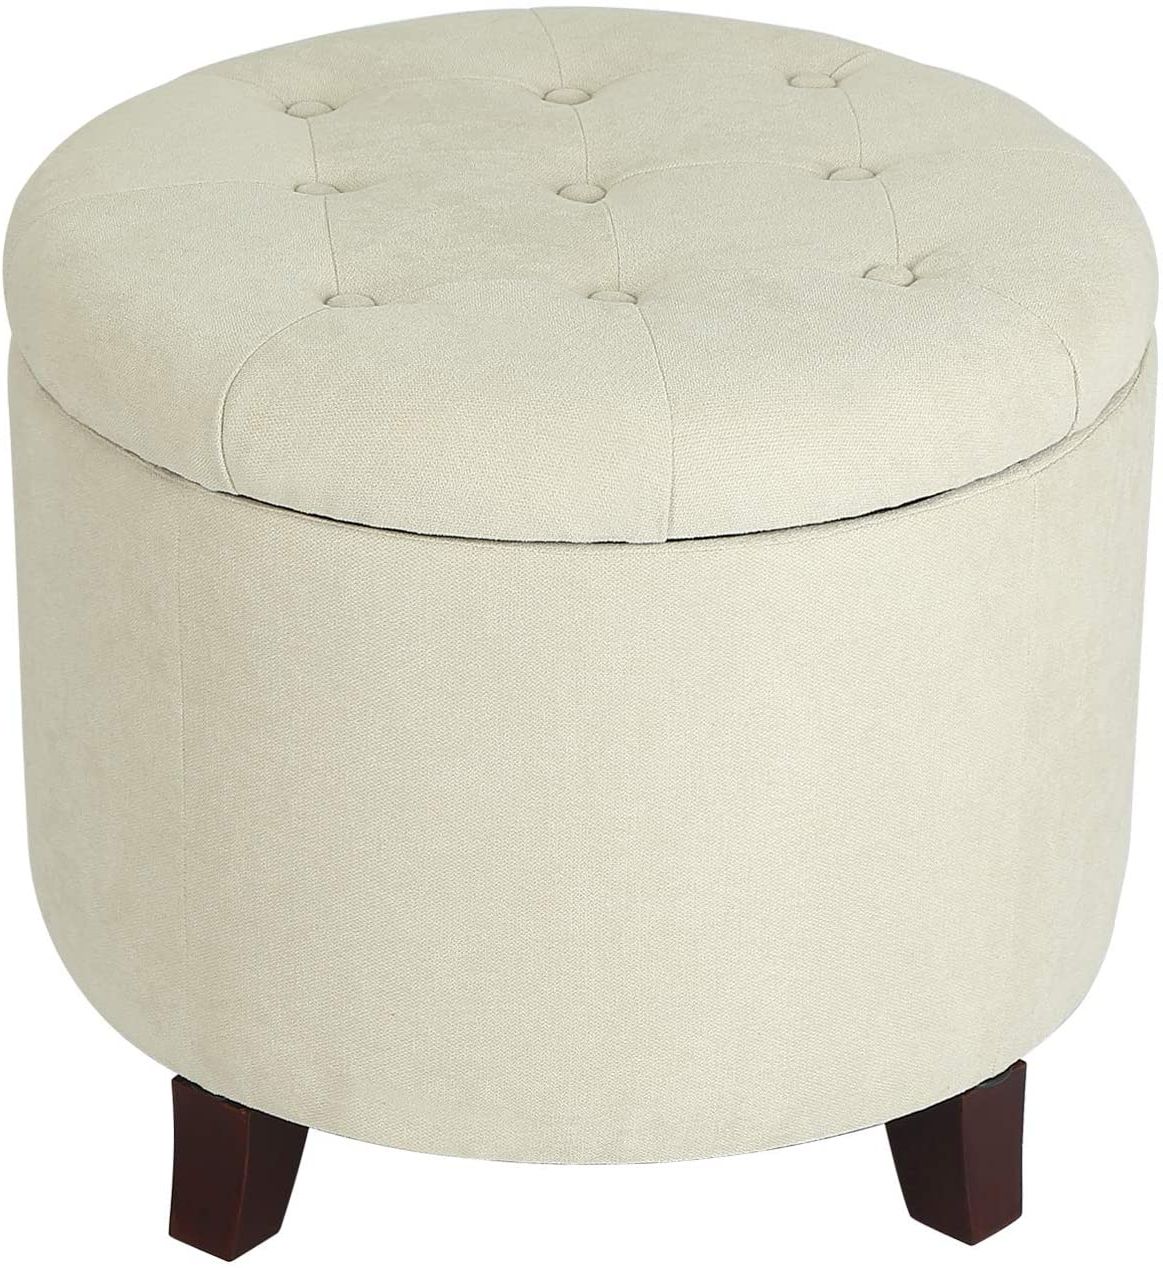 Most Recently Released Round Beige Faux Leather Ottomans With Pull Tab Pertaining To Best Round White Leather Ottoman Tufted – Your House (View 10 of 10)